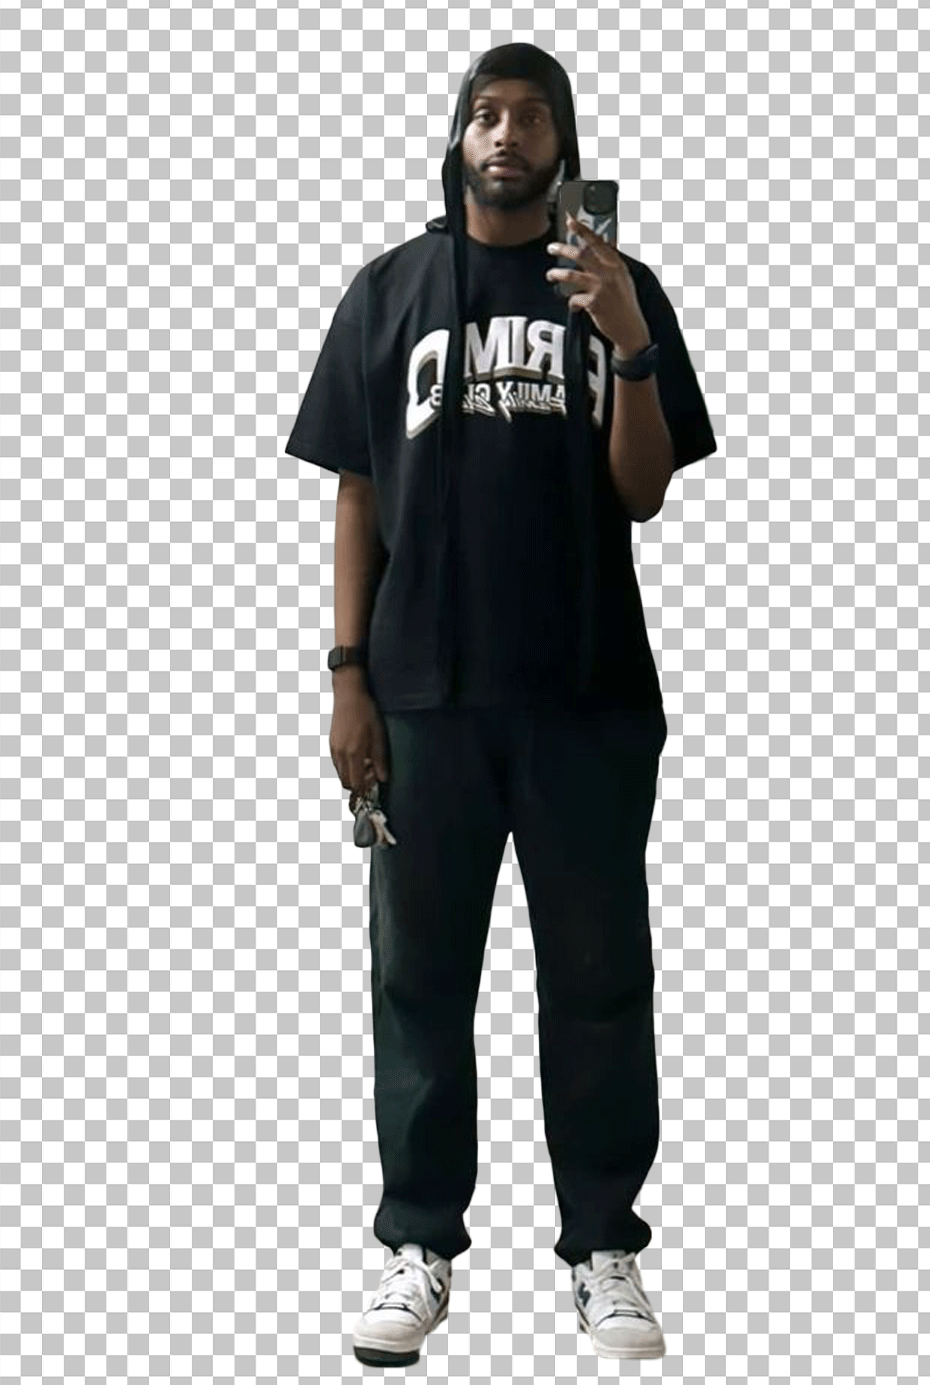 Sharky is taking selfie and wearing a black t-shirt and black pants, PNG Image